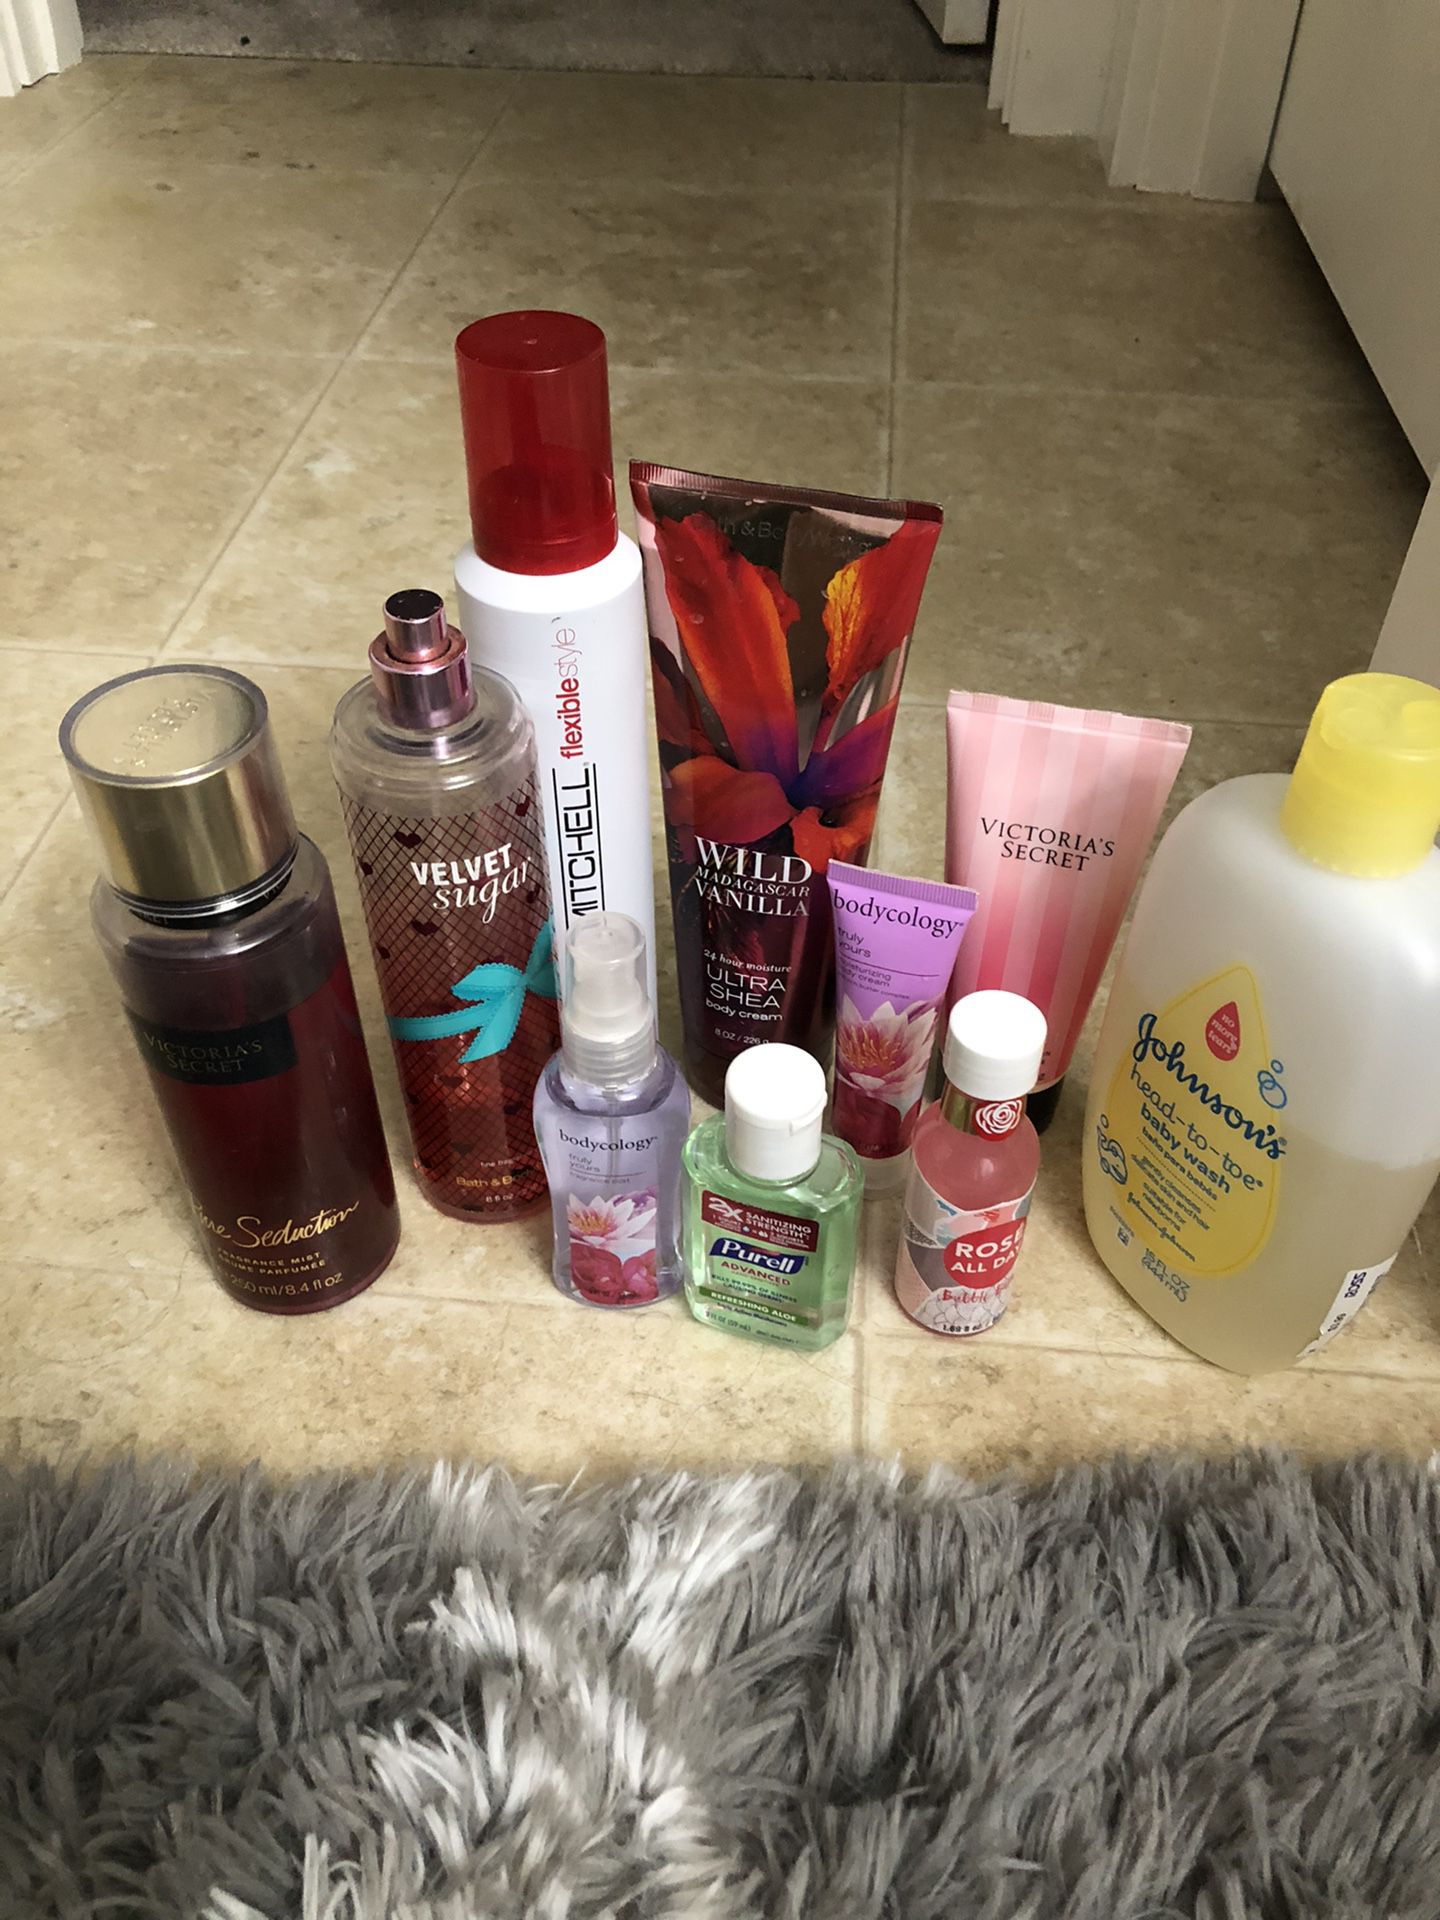 Lotions, body care, perfume, hair care